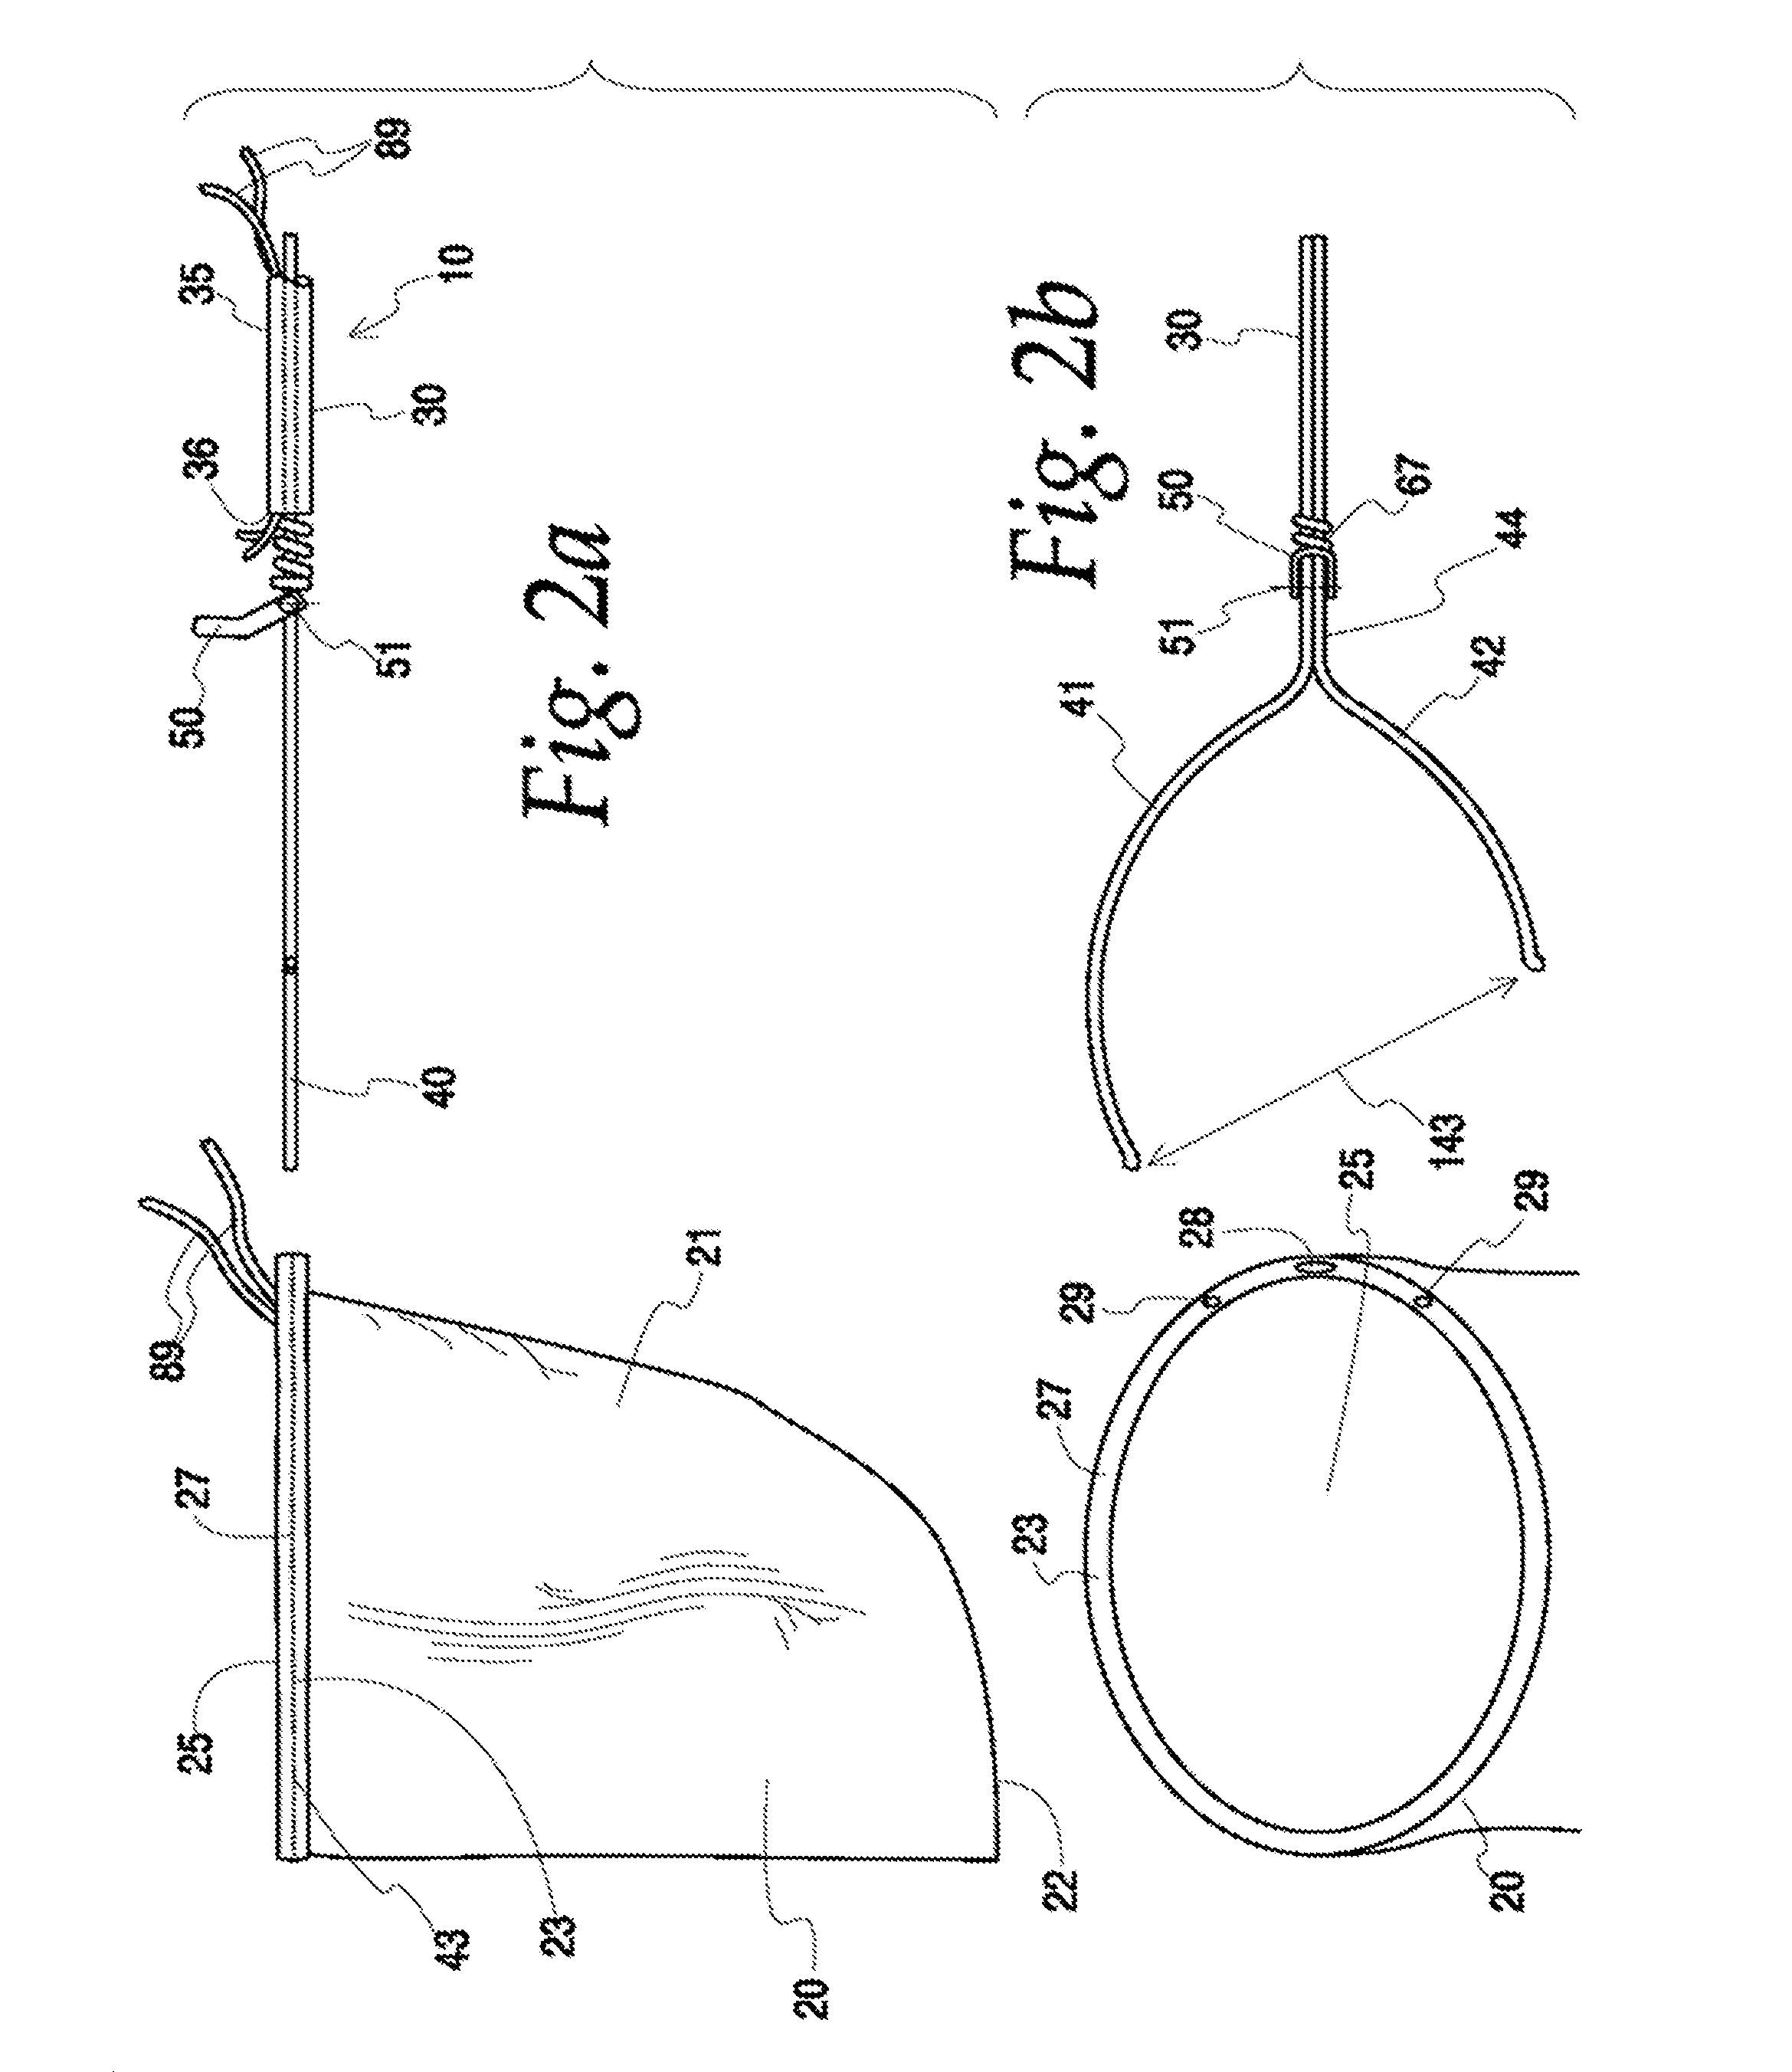 Surgical tissue retrieval instrument and method of use of a surgical tissue retrieval instrument